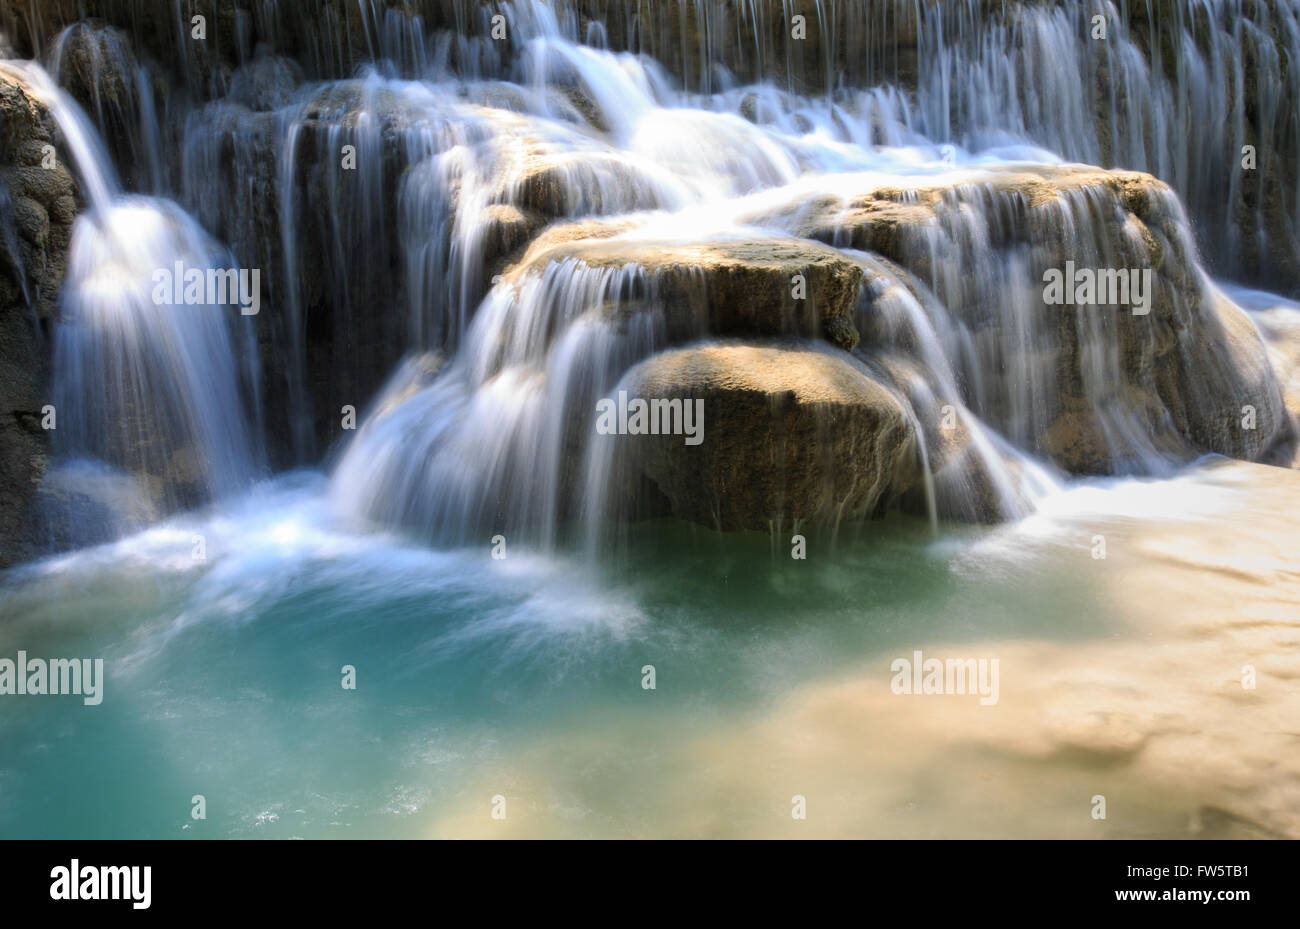 Green rushing water flowing over rocks Stock Photo